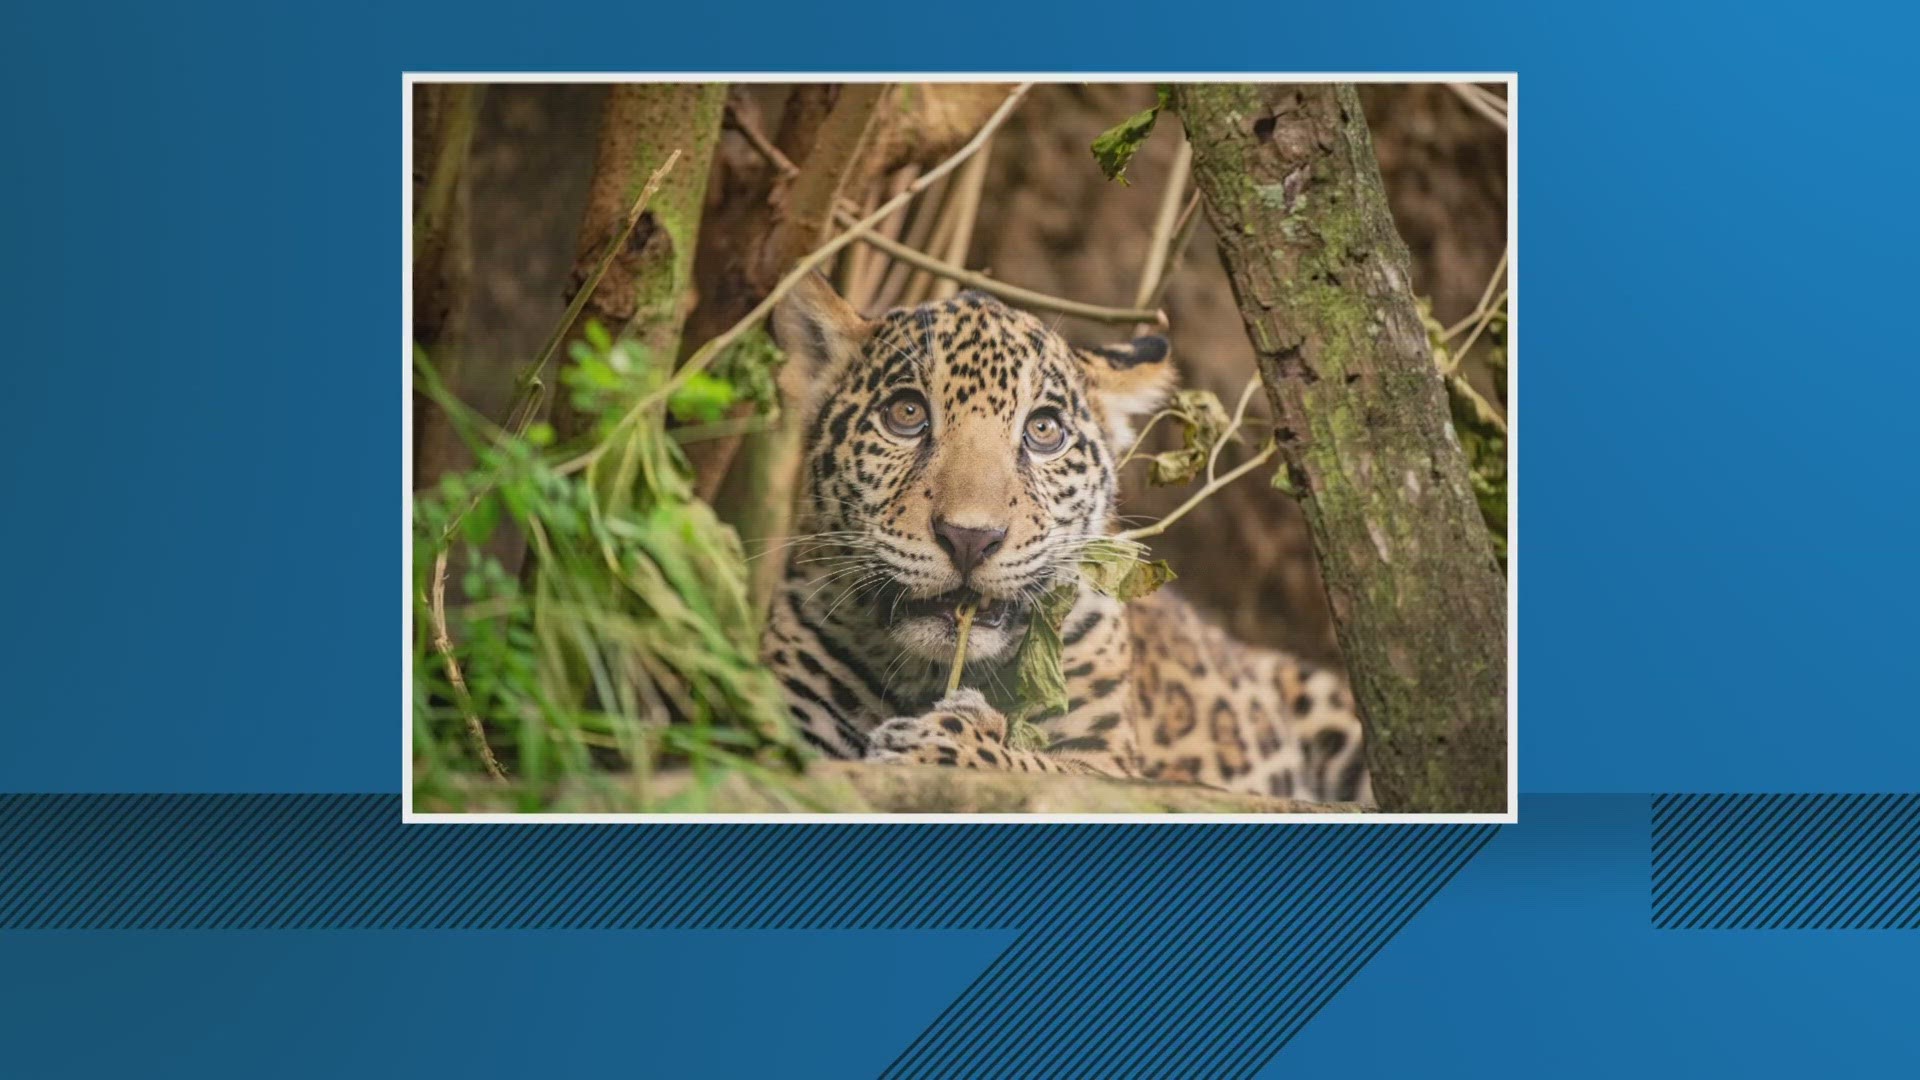 While celebrating Banks' first full year of life, the zoo highlighted the importance of protecting jaguars worldwide.